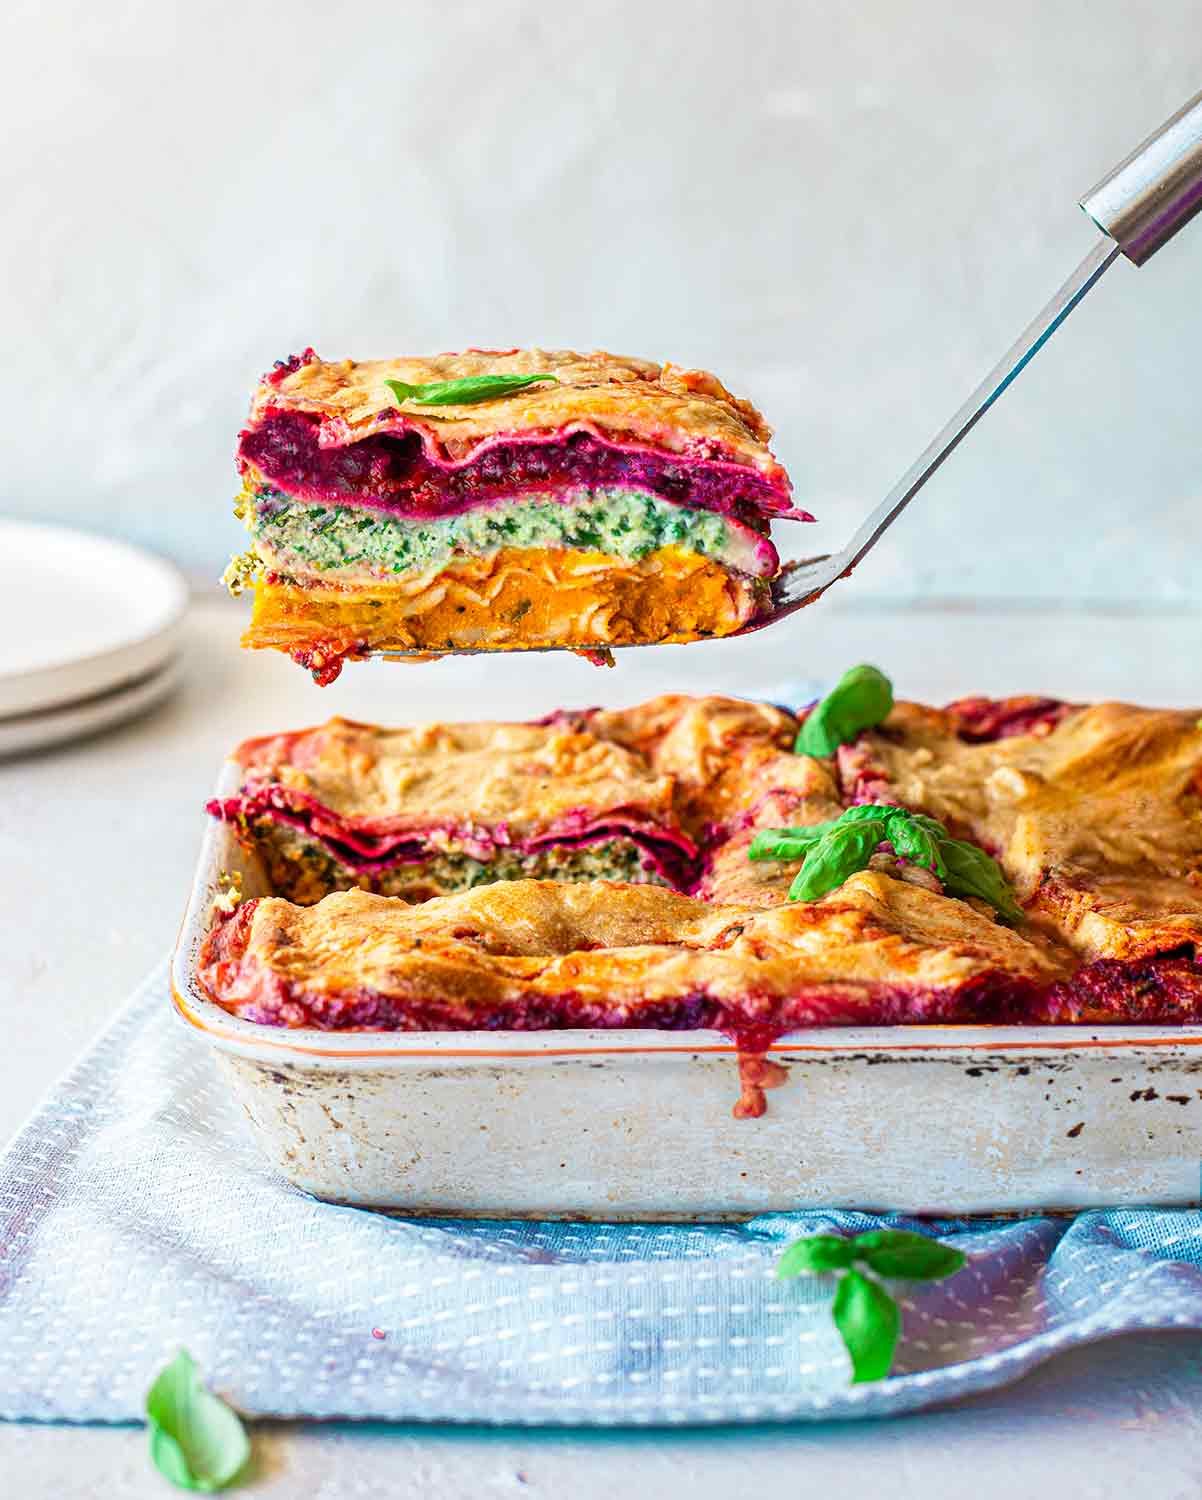 Vegan Rainbow Lasagna in casserole dish with slice lifted out revealing all the colourful layers.